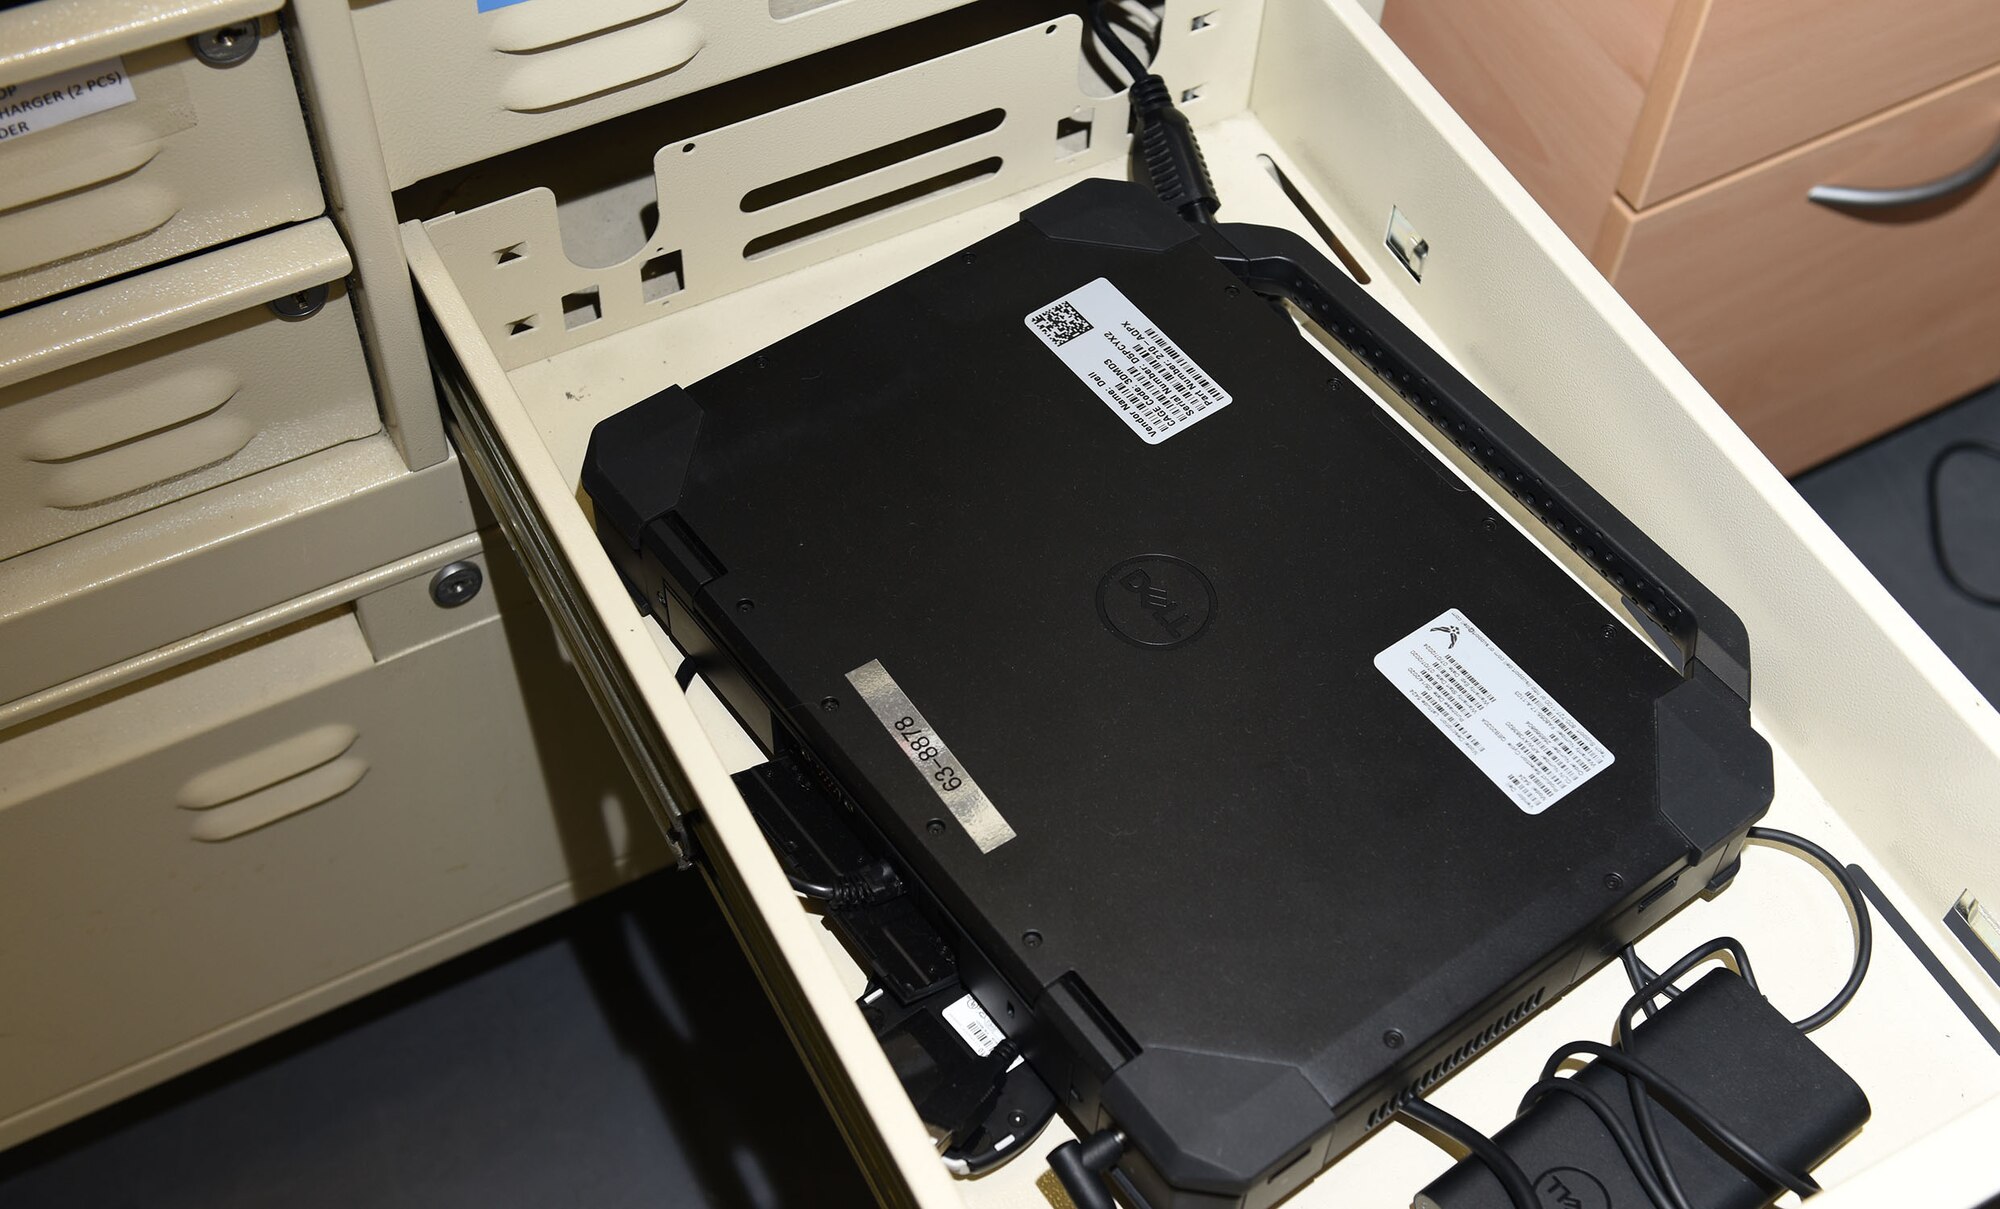 A laptop and charger, used for the 100th Maintenance Group’s virtual forms program, is stored in a cabinet at Royal Air Force Mildenhall, England, Sept. 3, 2020. Each drawer contains the equipment assigned for a specific aircraft, including WiFi pucks, which enables aircrew and flying crew chiefs to update documentation on the 100th Air Refueling Wing’s KC-135 Stratotanker aircraft anywhere in Europe without the need for paper forms. (U.S. Air Force photo by Karen Abeyasekere)